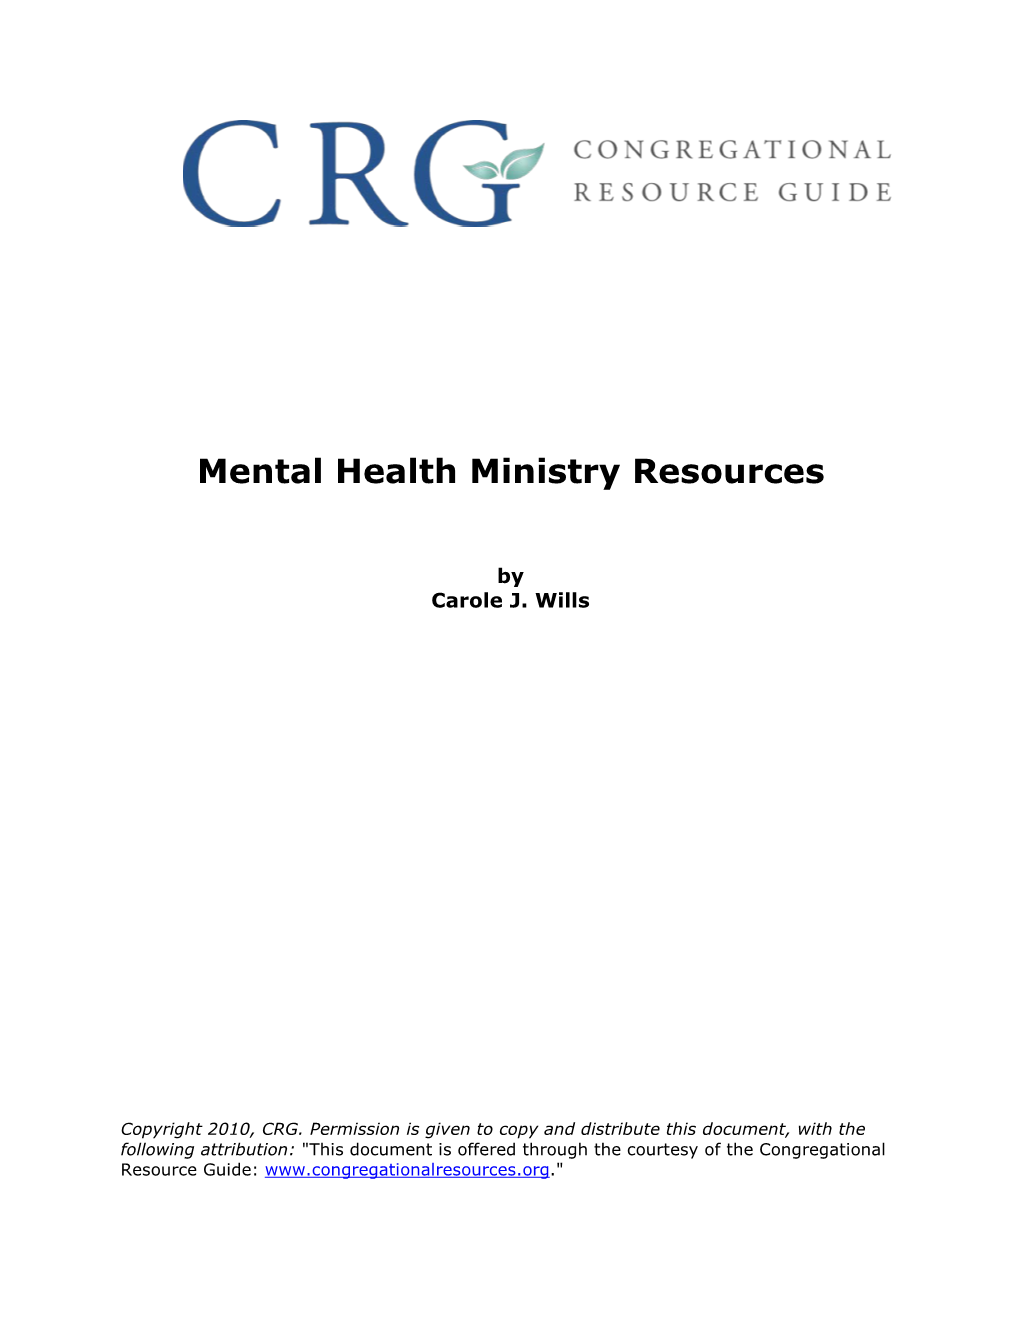 Mental Health Ministry Resources